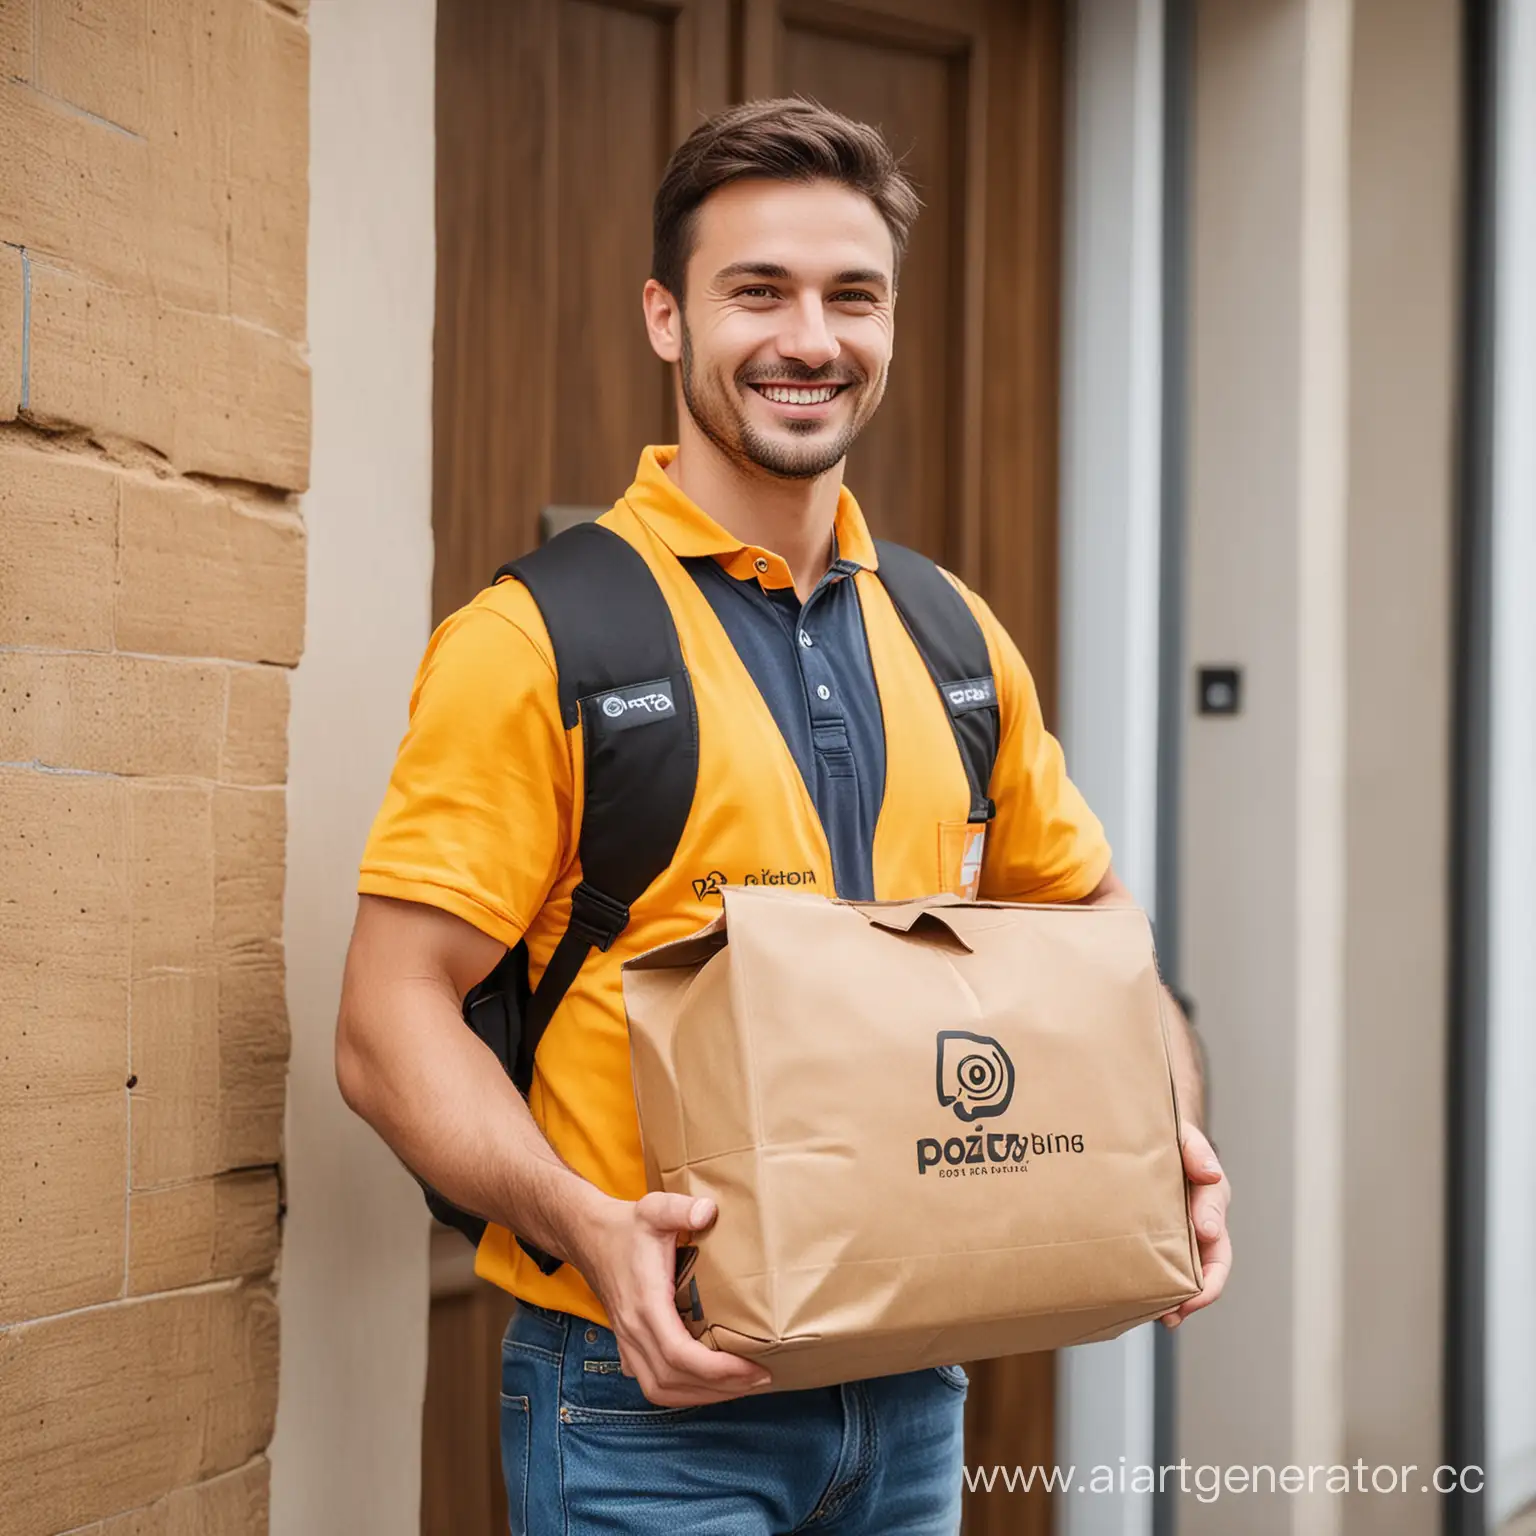 Joyful-Courier-Delivering-Poizon-Package-with-Bright-Bag